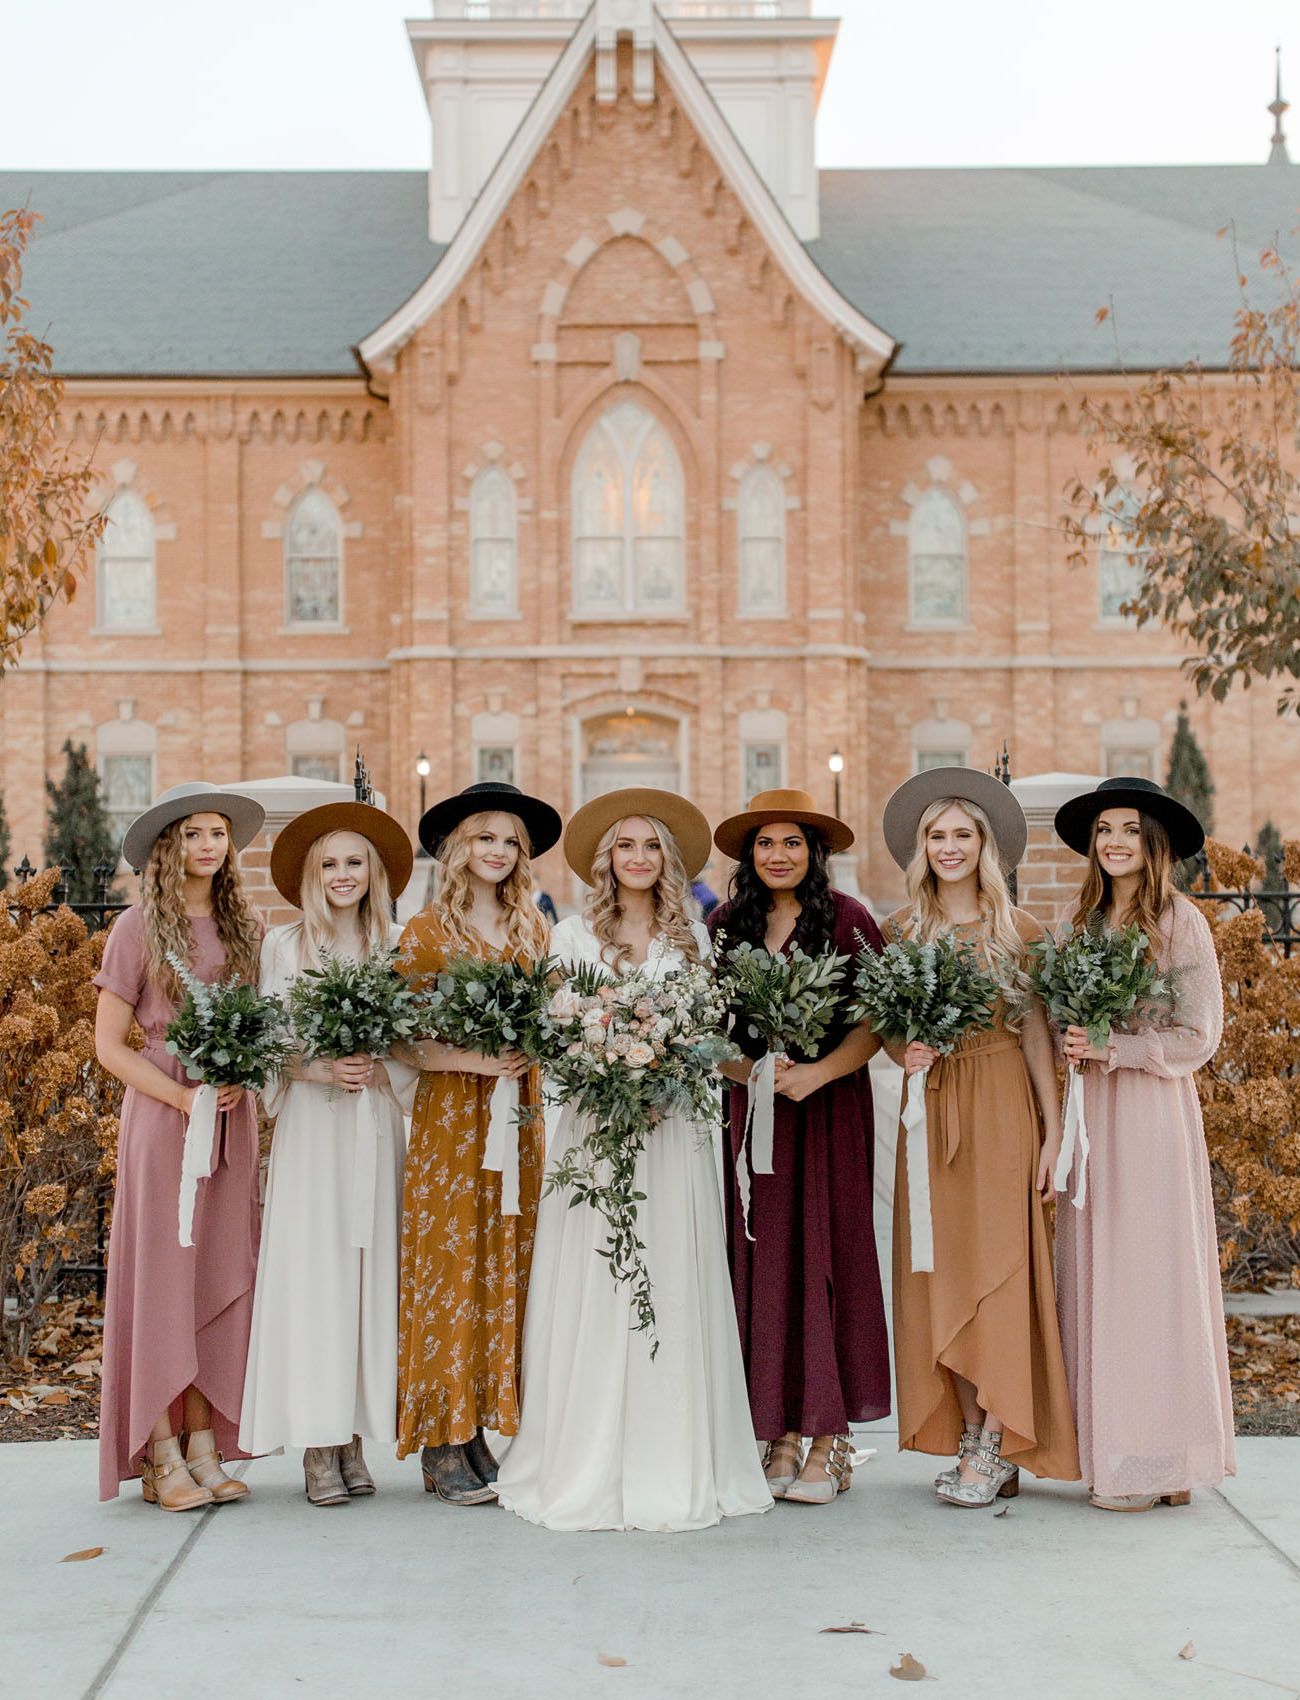 We'd Rock This Boho Bridesmaids Look at the Drop of a Hat | Green Wedding Shoes -   16 wedding Bridesmaids gowns ideas